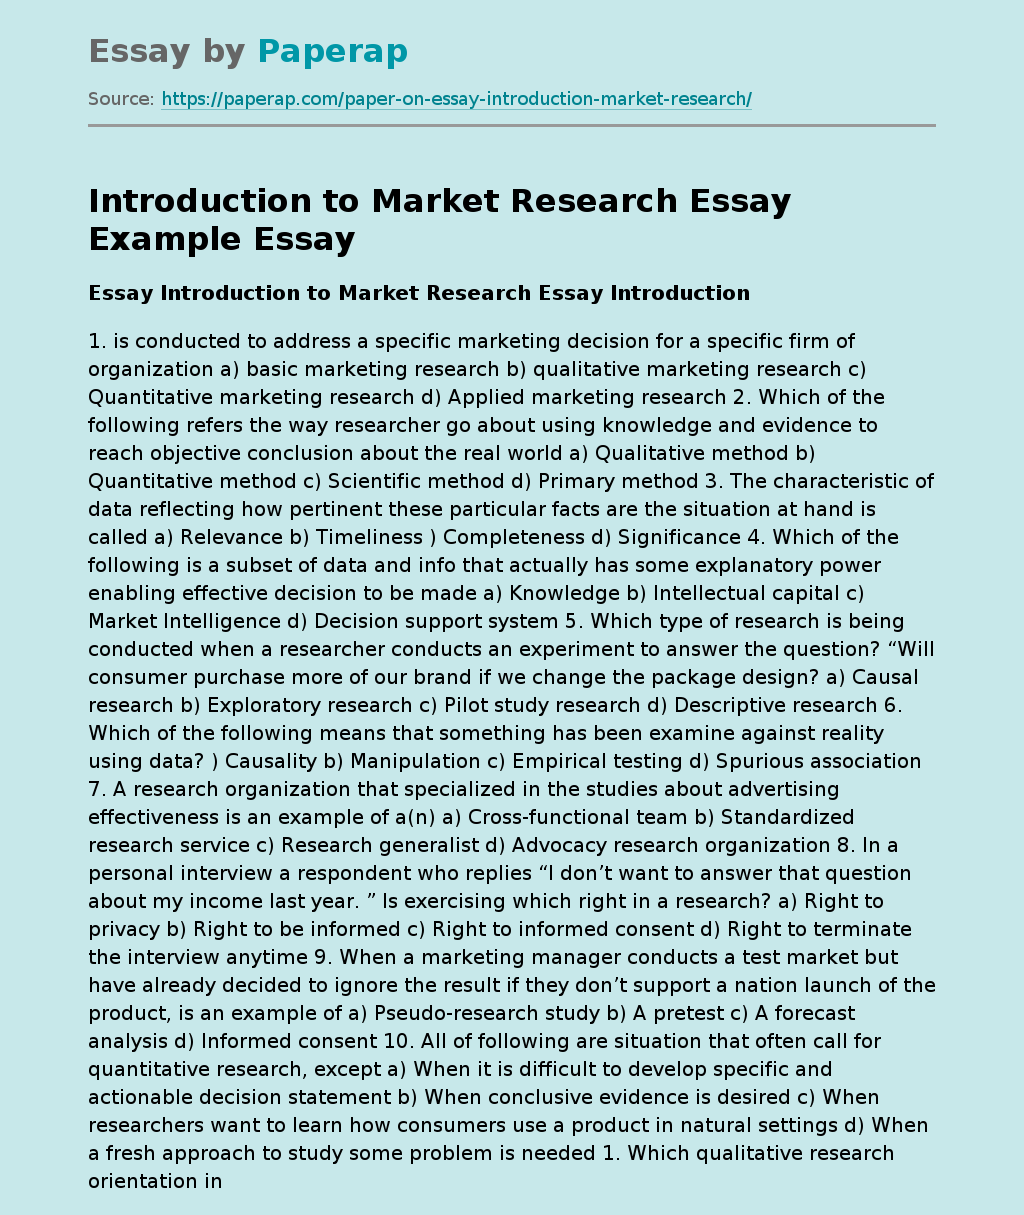 Introduction to Market Research Essay Example